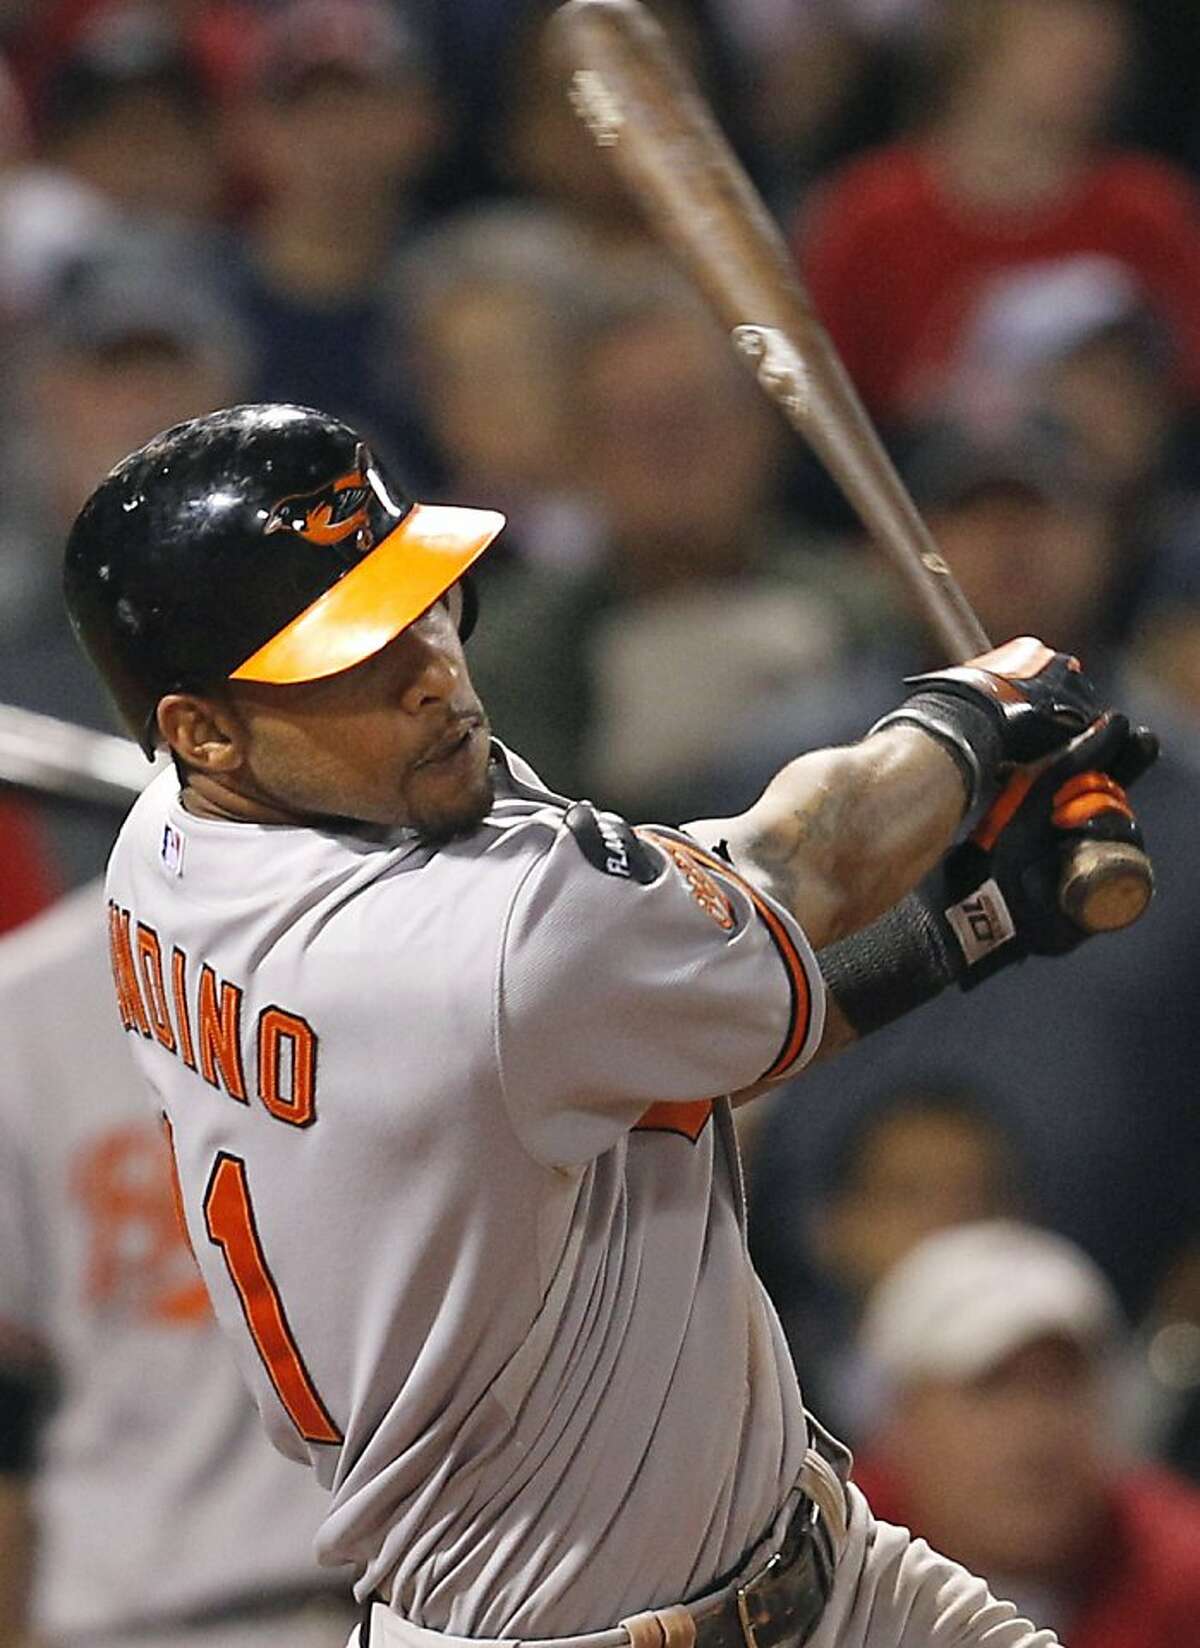 Baltimore Orioles' Robert Andino watches his three-run double against the Boston Red Sox in the eighth inning of a baseball game at Fenway Park in Boston, Tuesday, Sept. 20, 2011. (AP Photo/Elise Amendola)